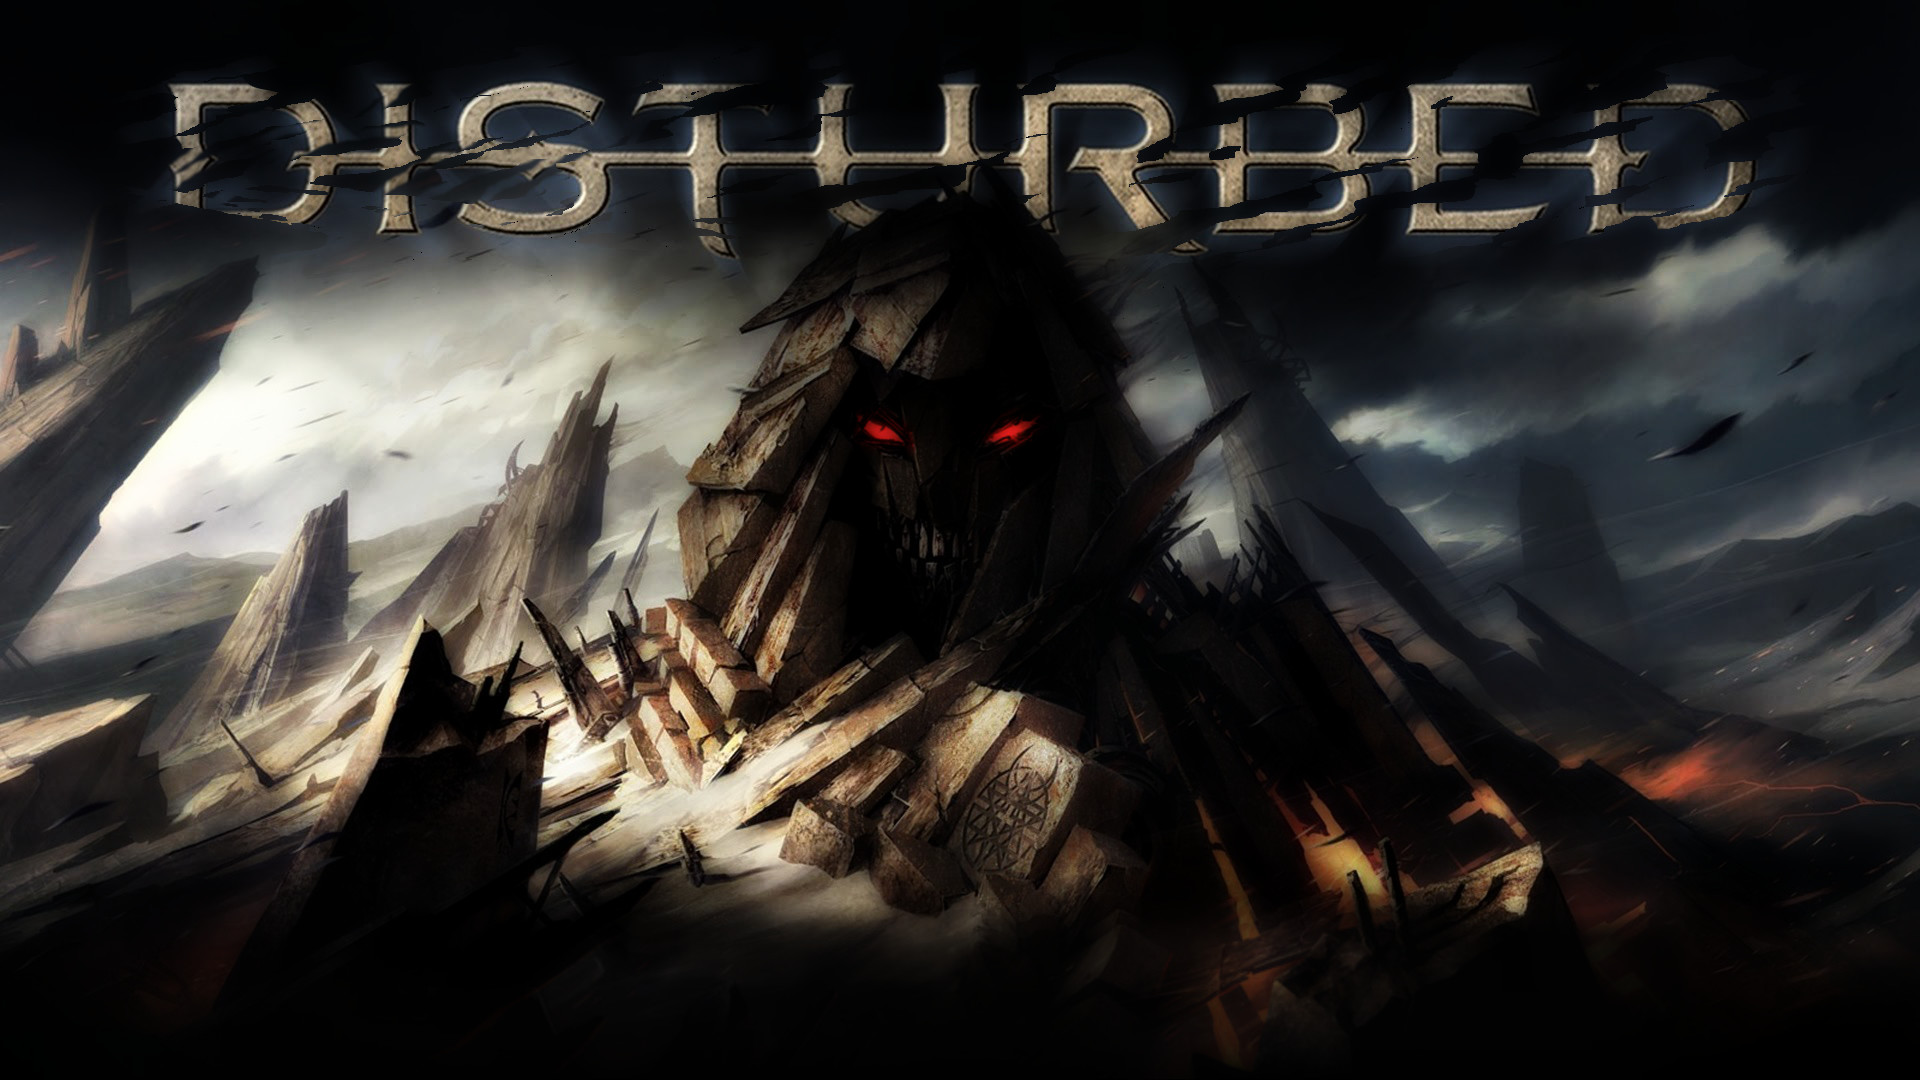 1920x1080 Disturbed - Immortality Darkness Wallpaper by FallenDemon99 on .